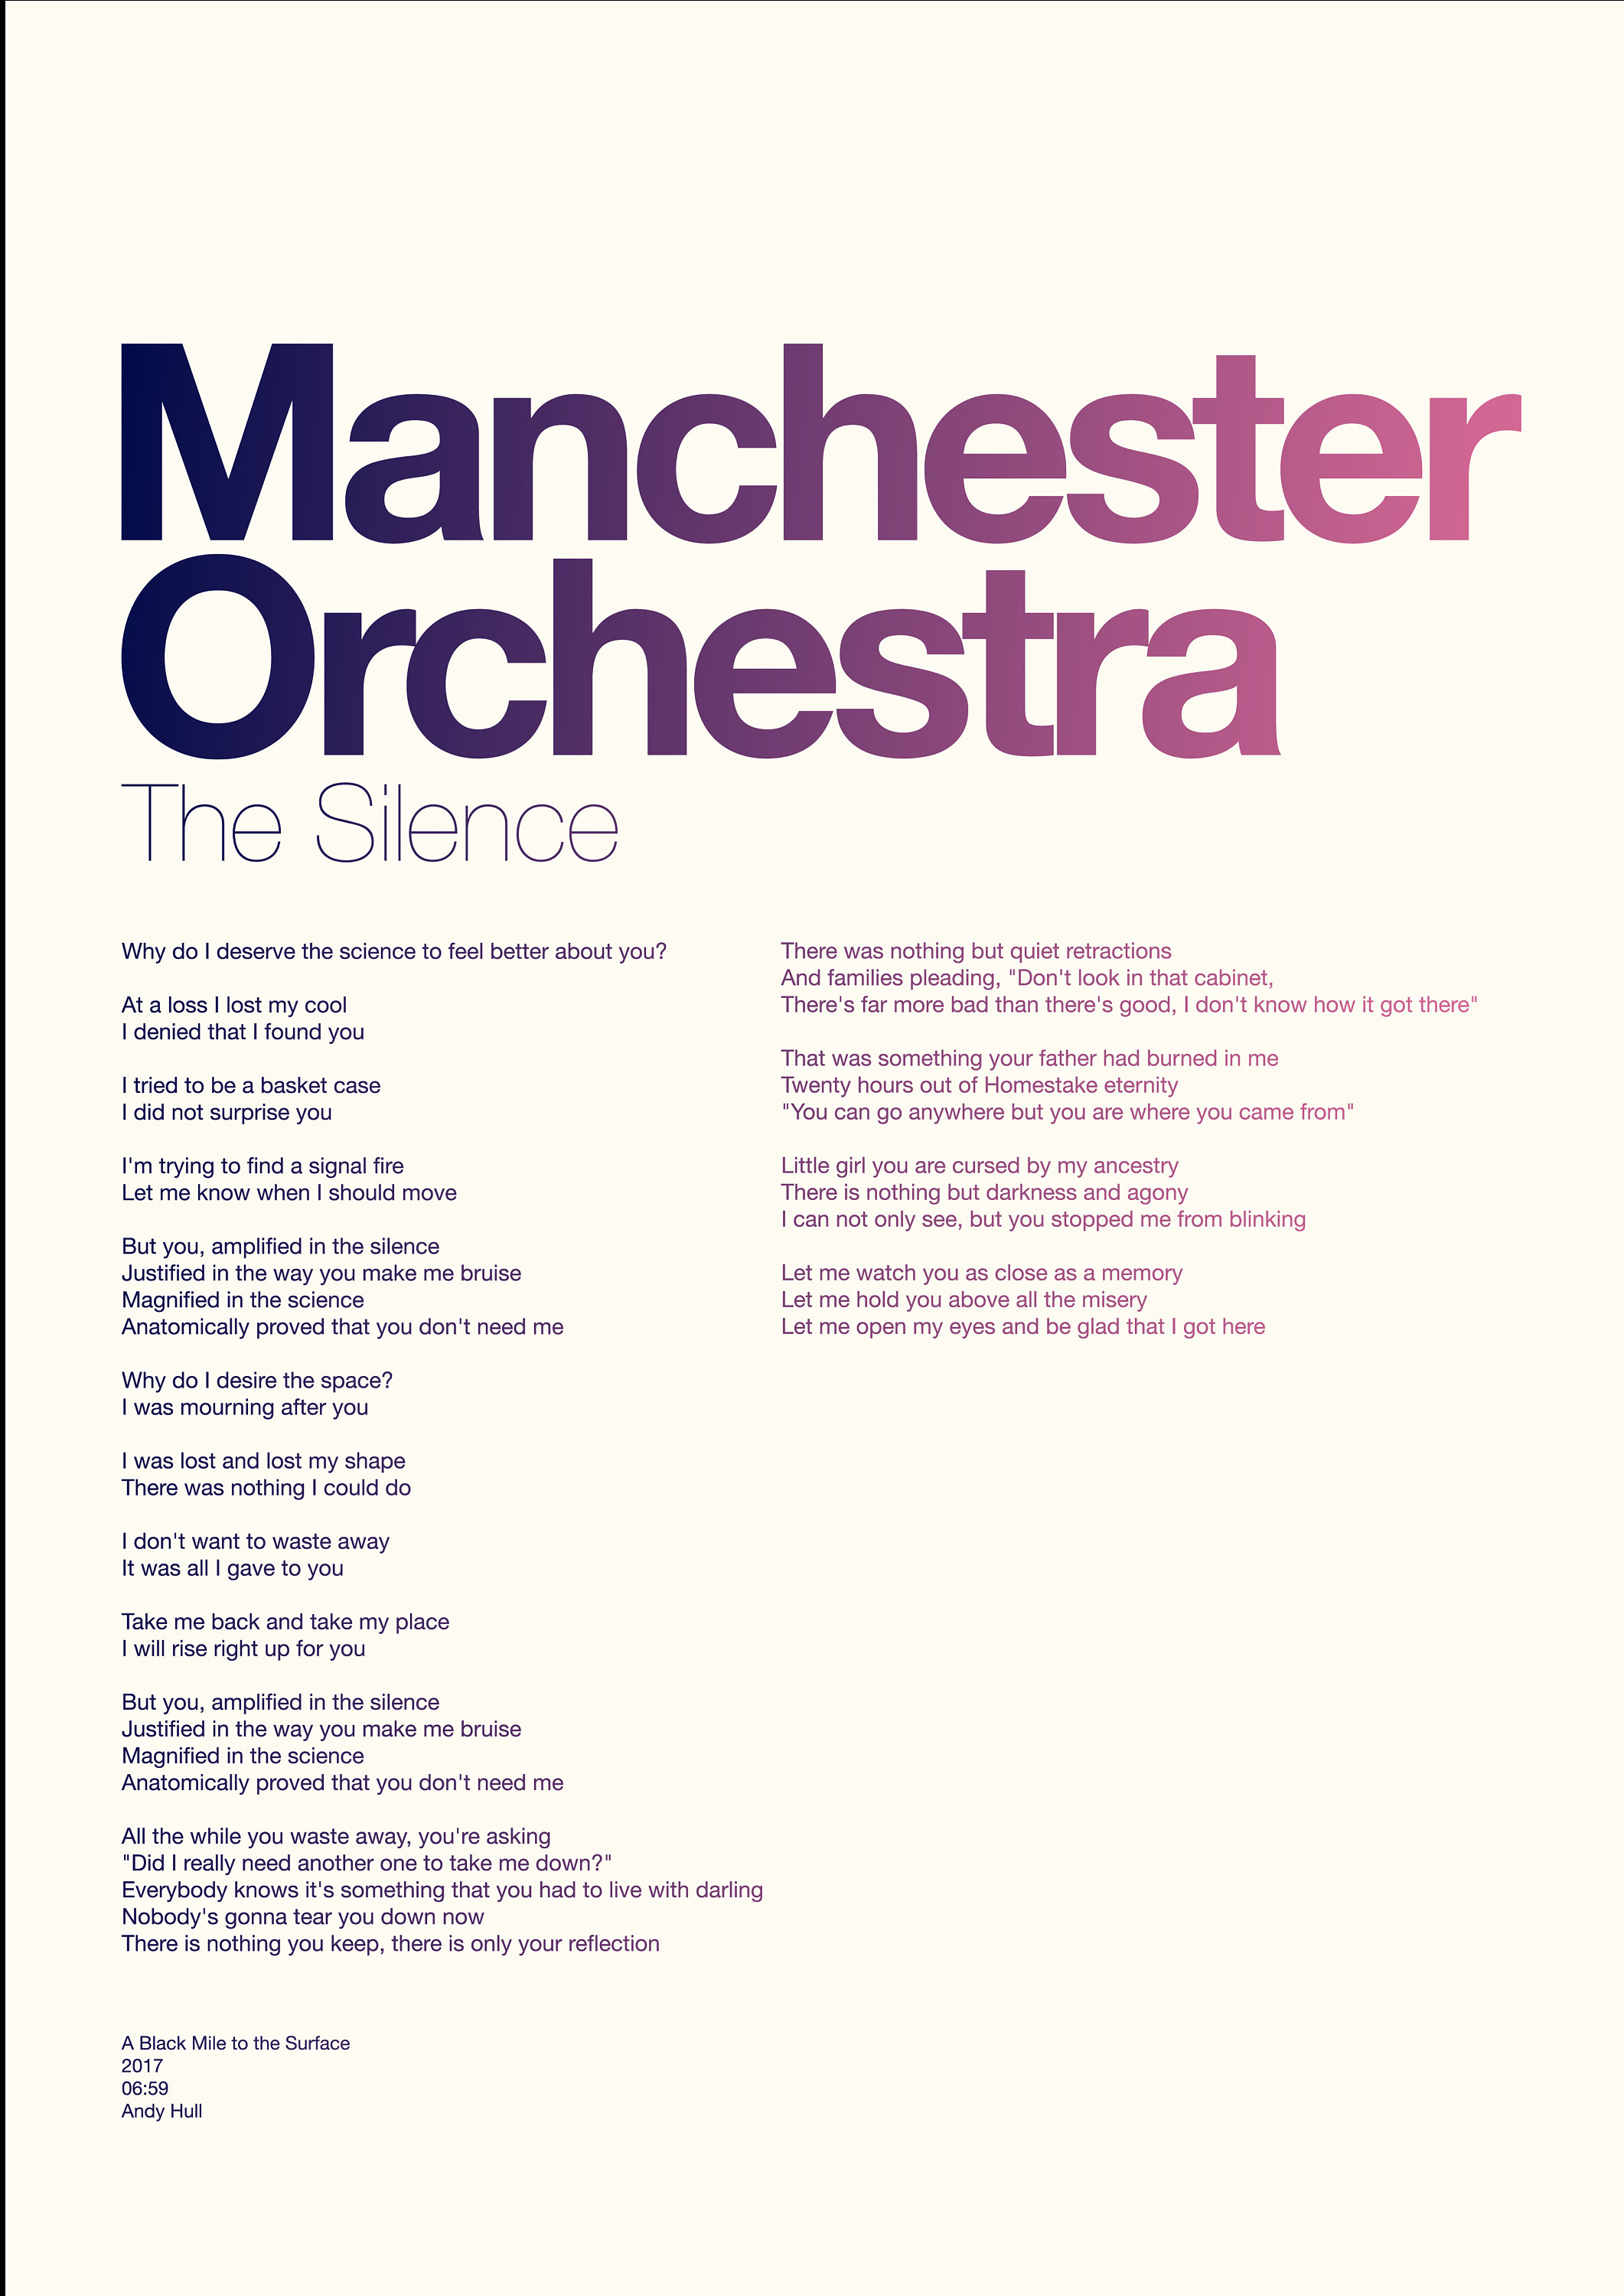 Music Poster Promo Manchester Orchestra A Black Mile To The Surface 